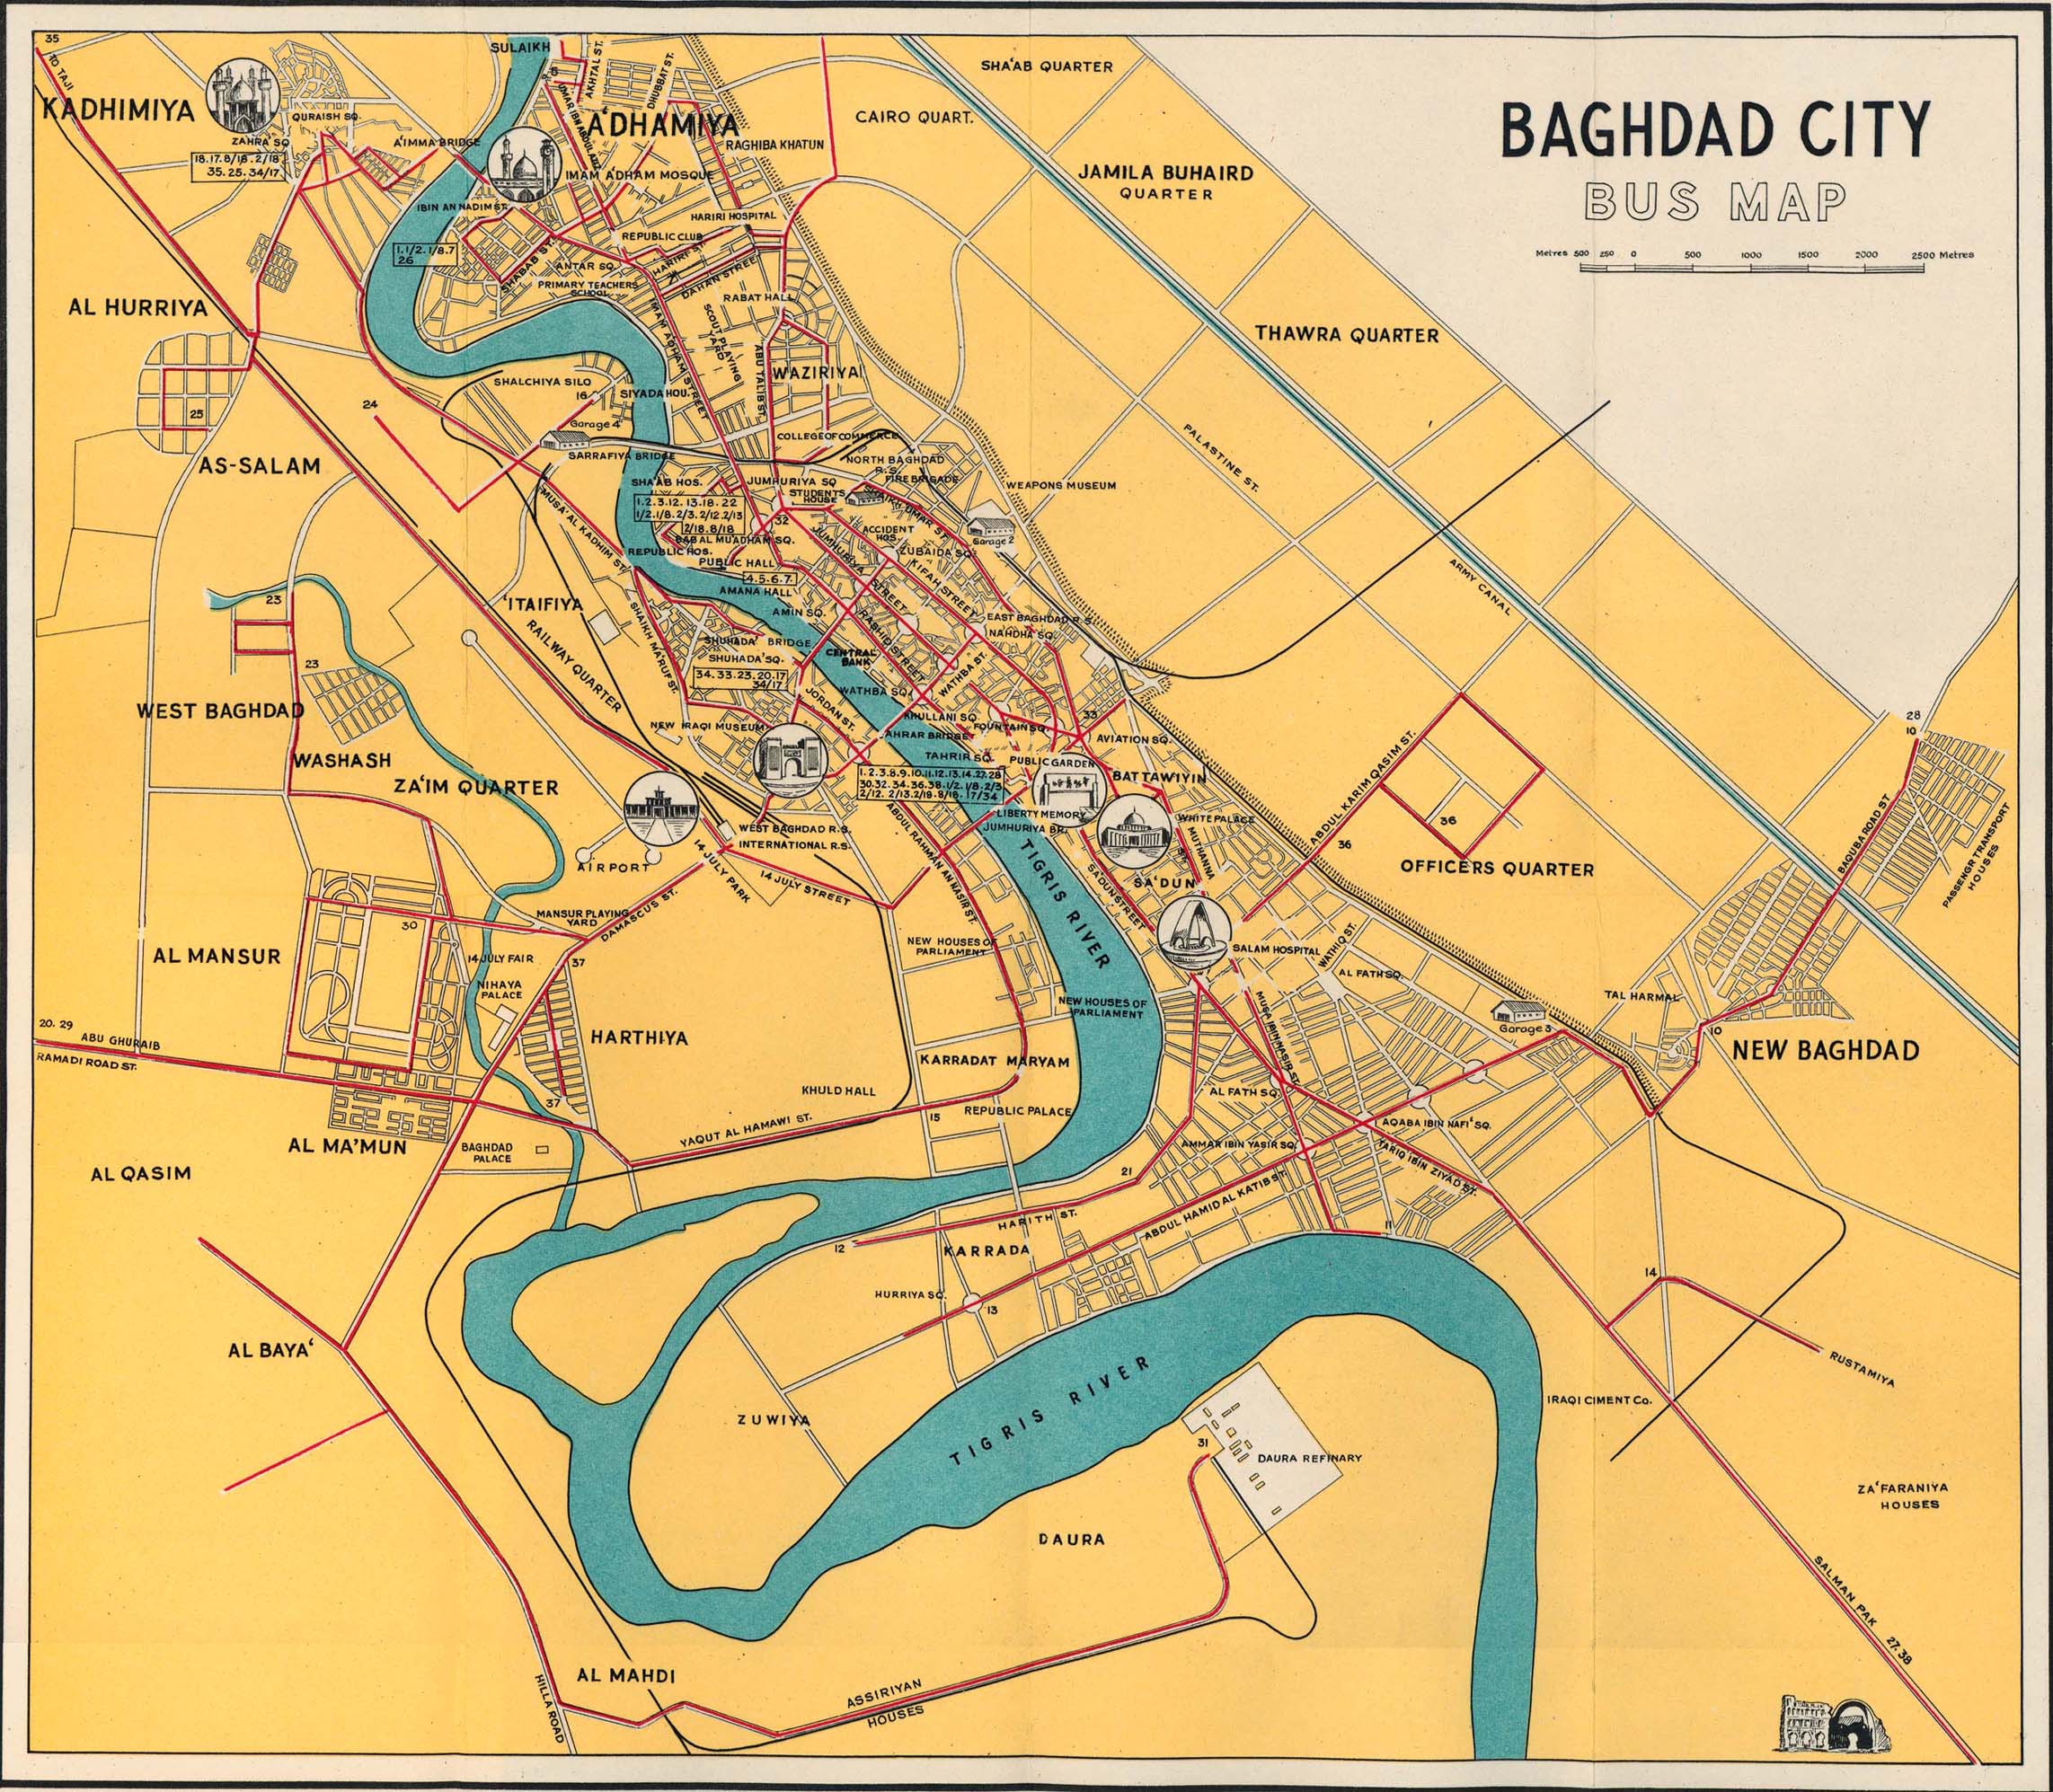 Iraq Maps - Perry-Castañeda Map Collection - UT Library Online